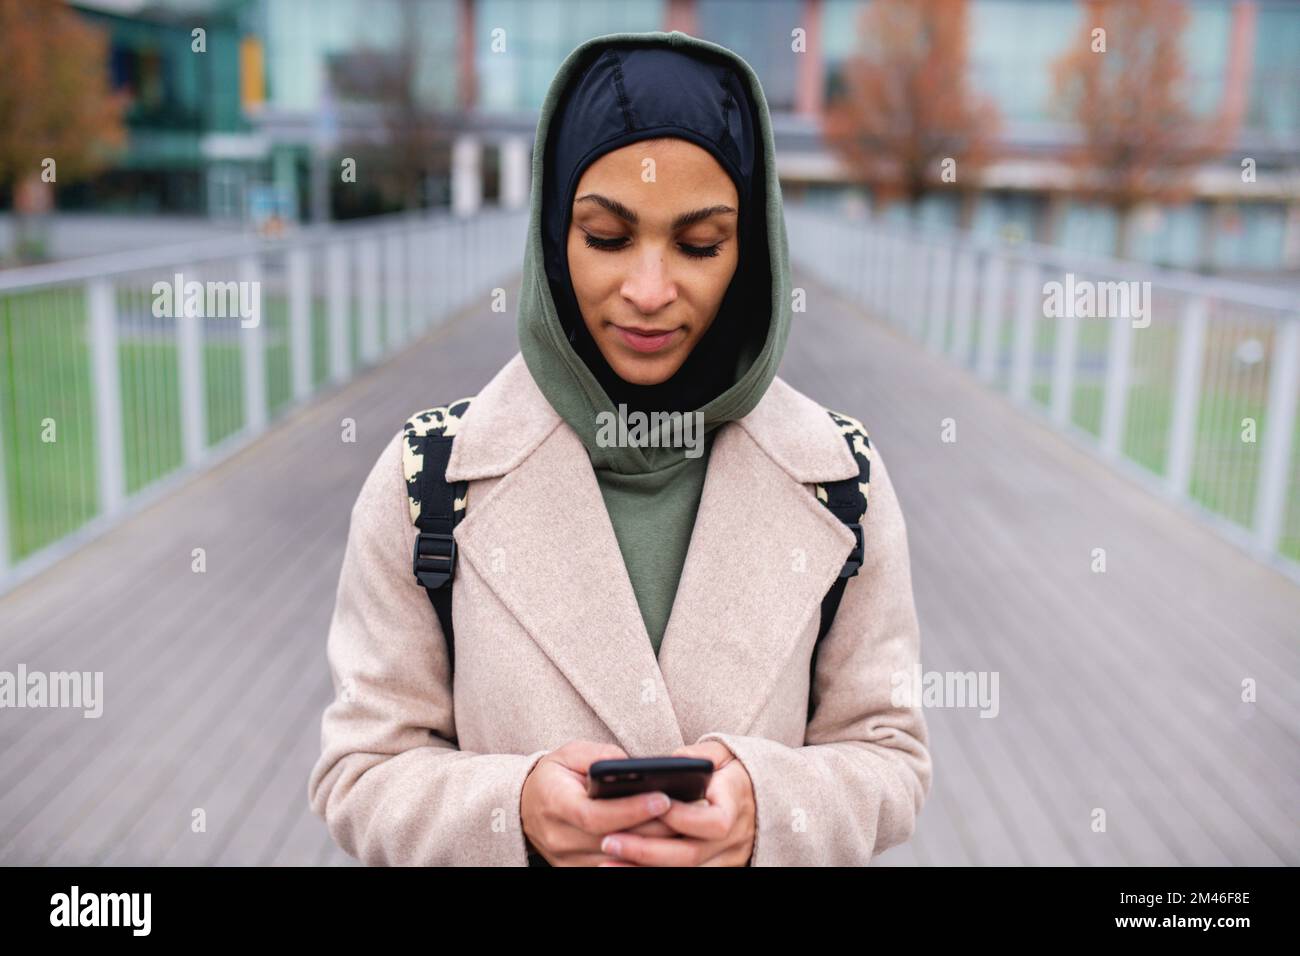 Portrait of young muslim woman in coat, standing outdoor in city, scrolling smartphone. Stock Photo